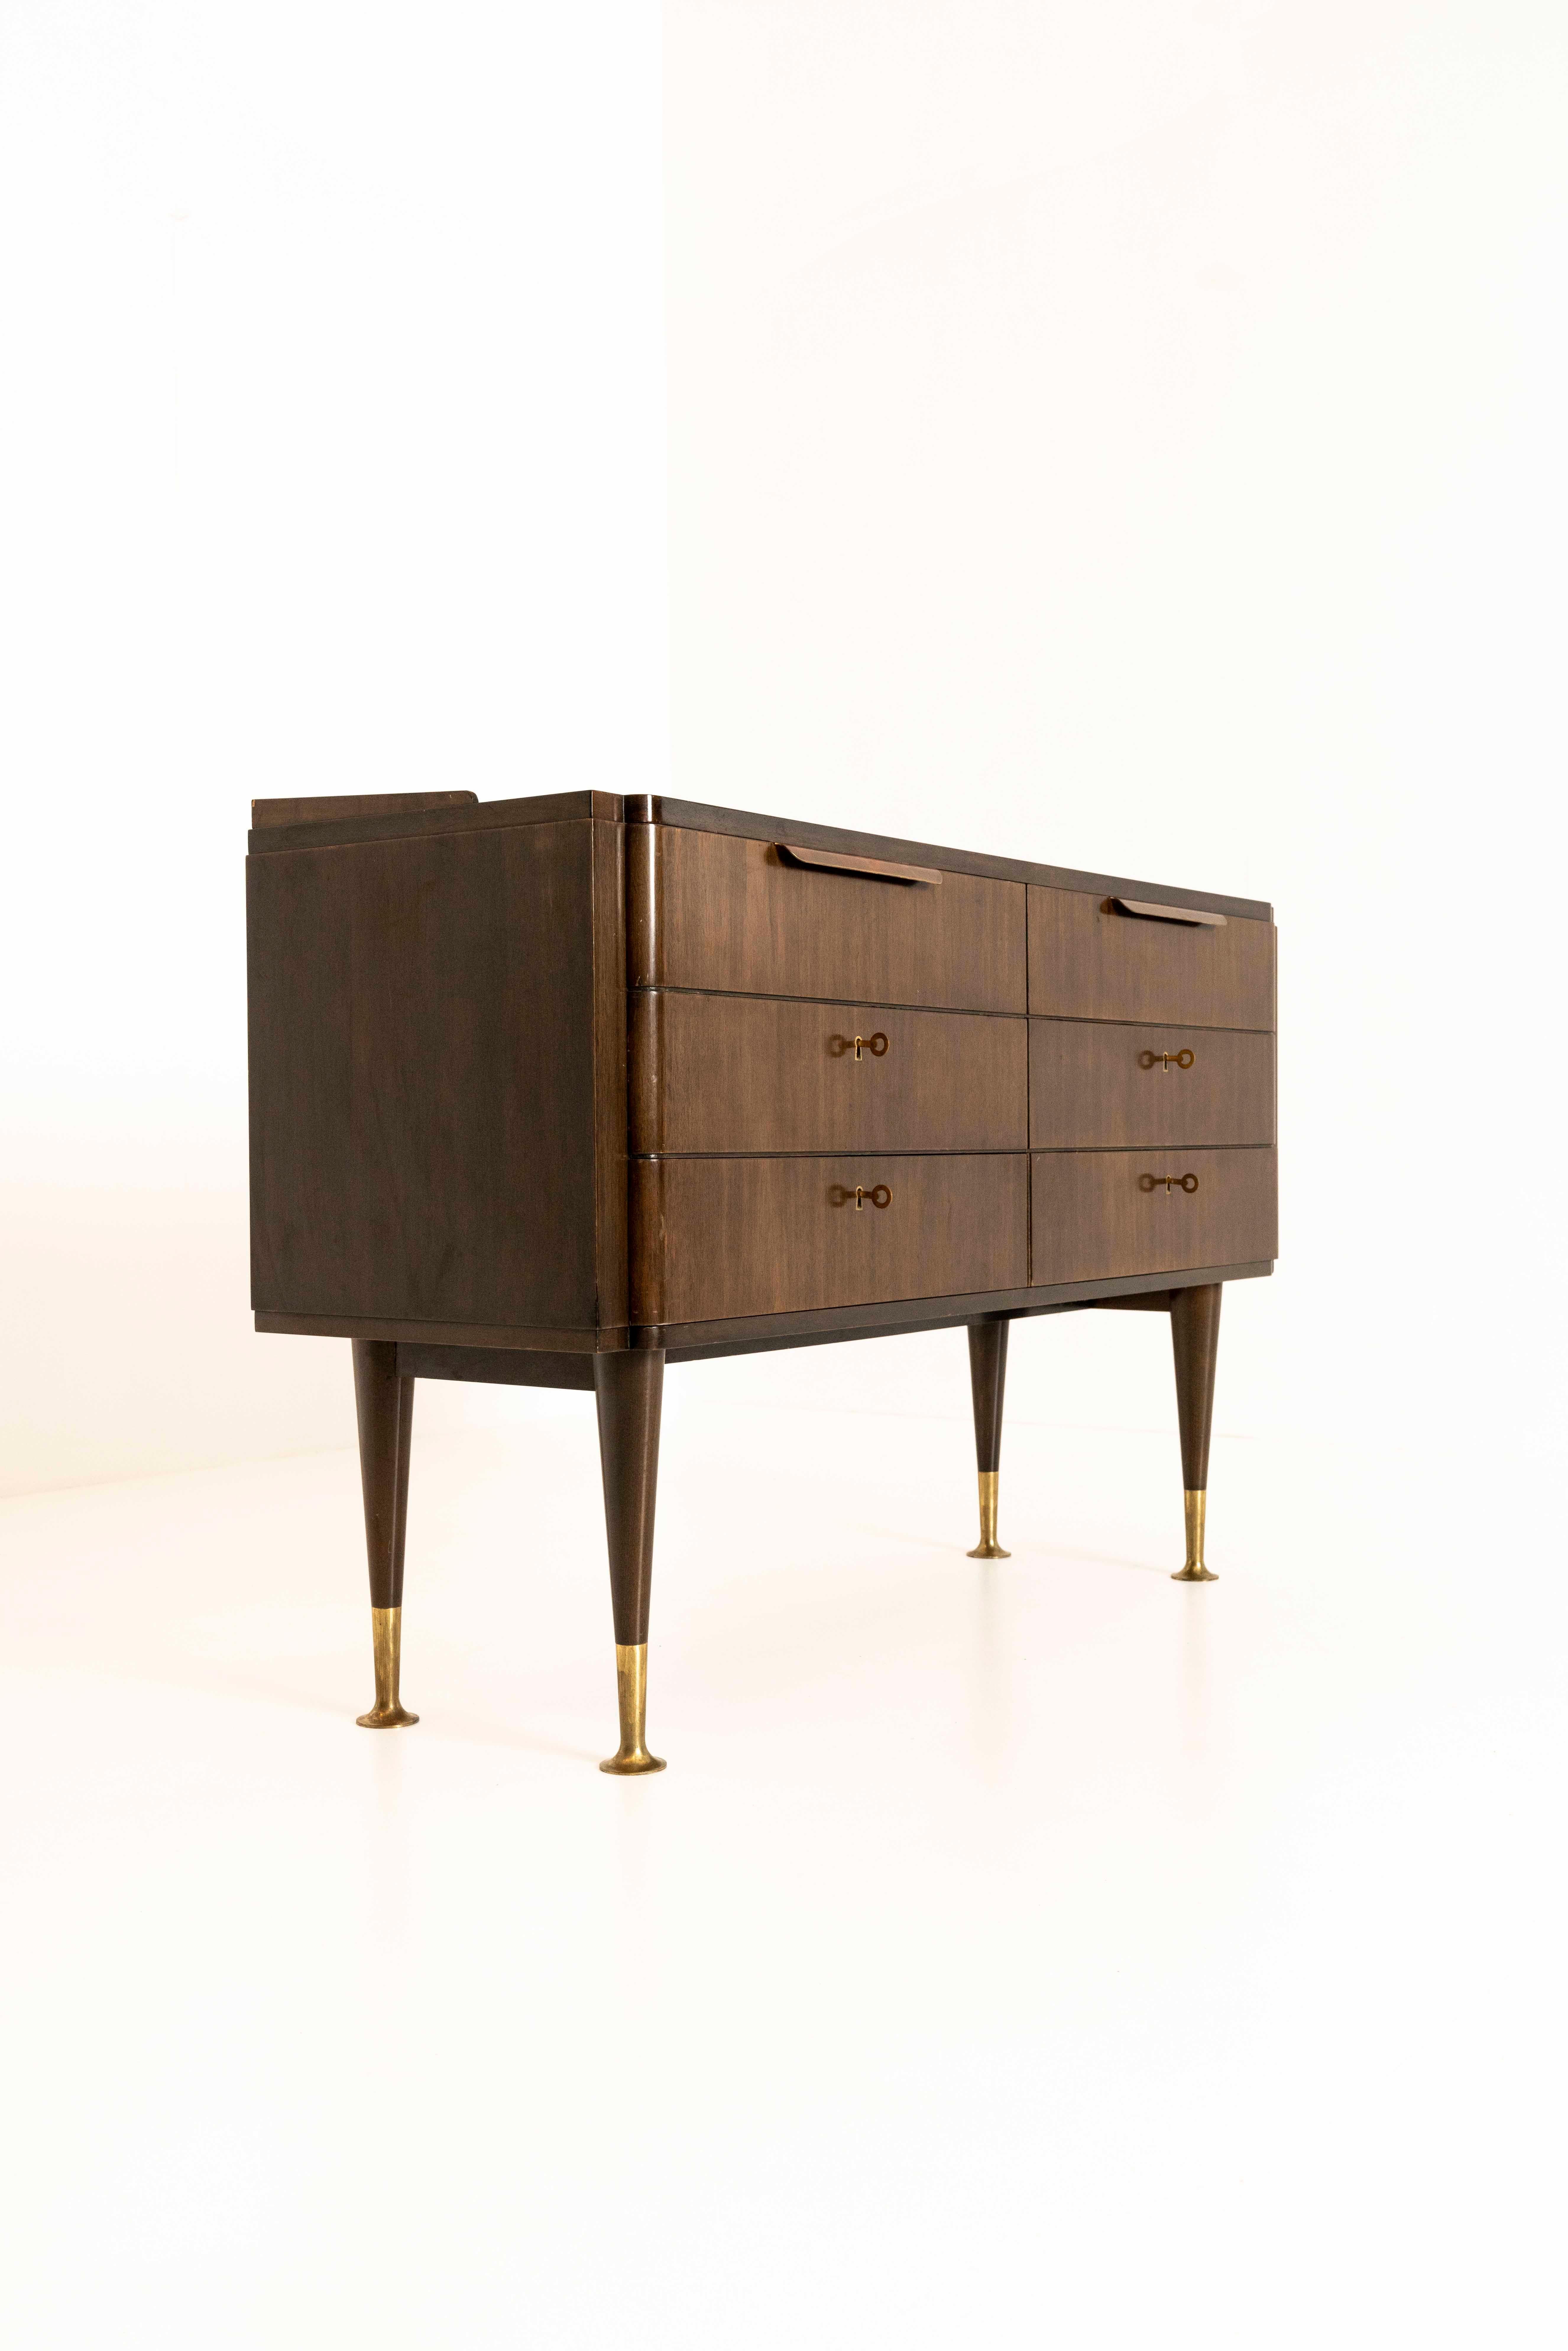 Early 20th Century Bruno Paul Cabinet from WK Möbel, Germany 1920s